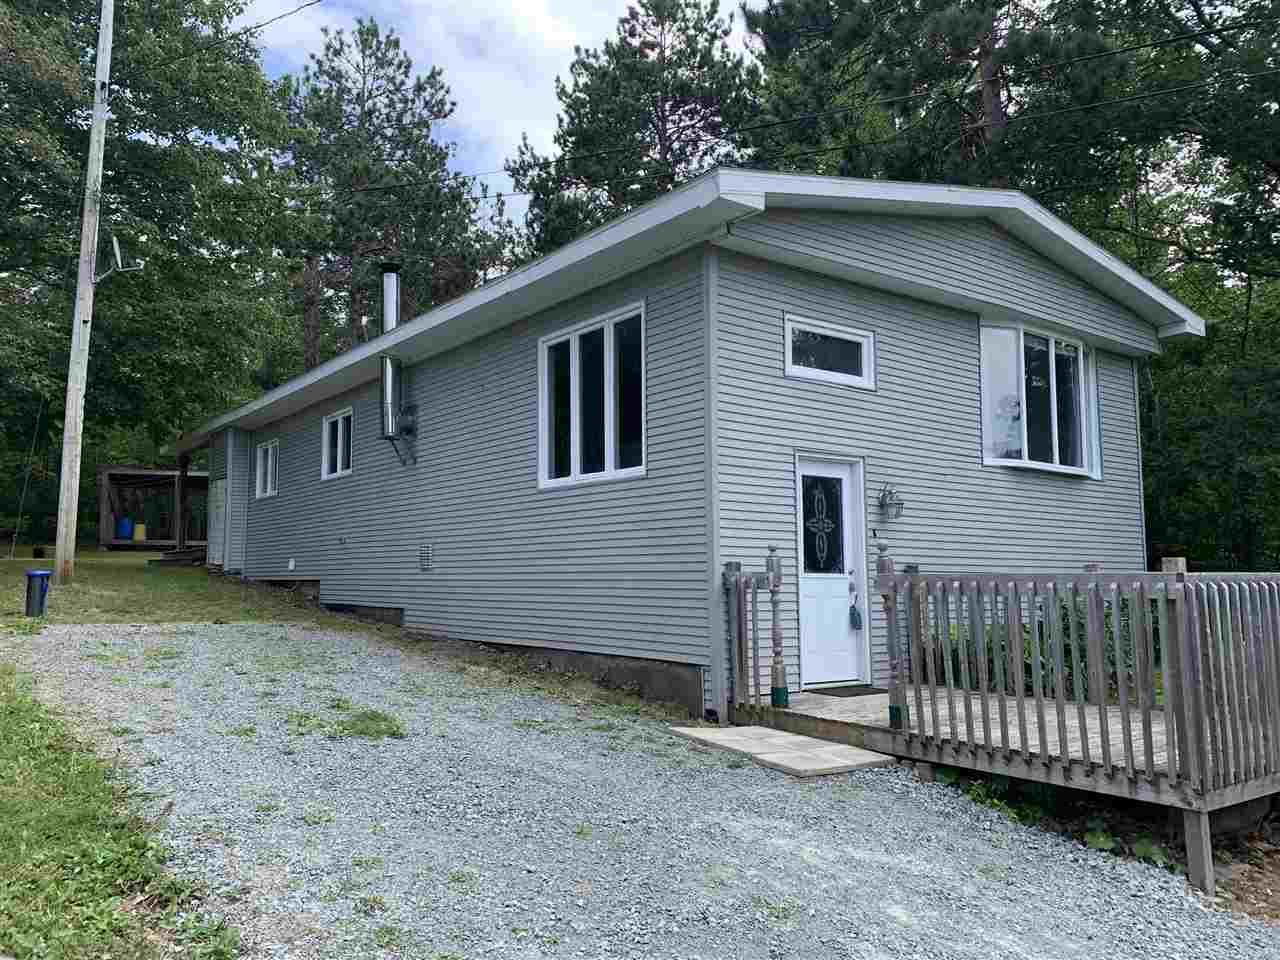 Main Photo: 4574 Highway 2 in Wellington: 30-Waverley, Fall River, Oakfield Residential for sale (Halifax-Dartmouth)  : MLS®# 202015795